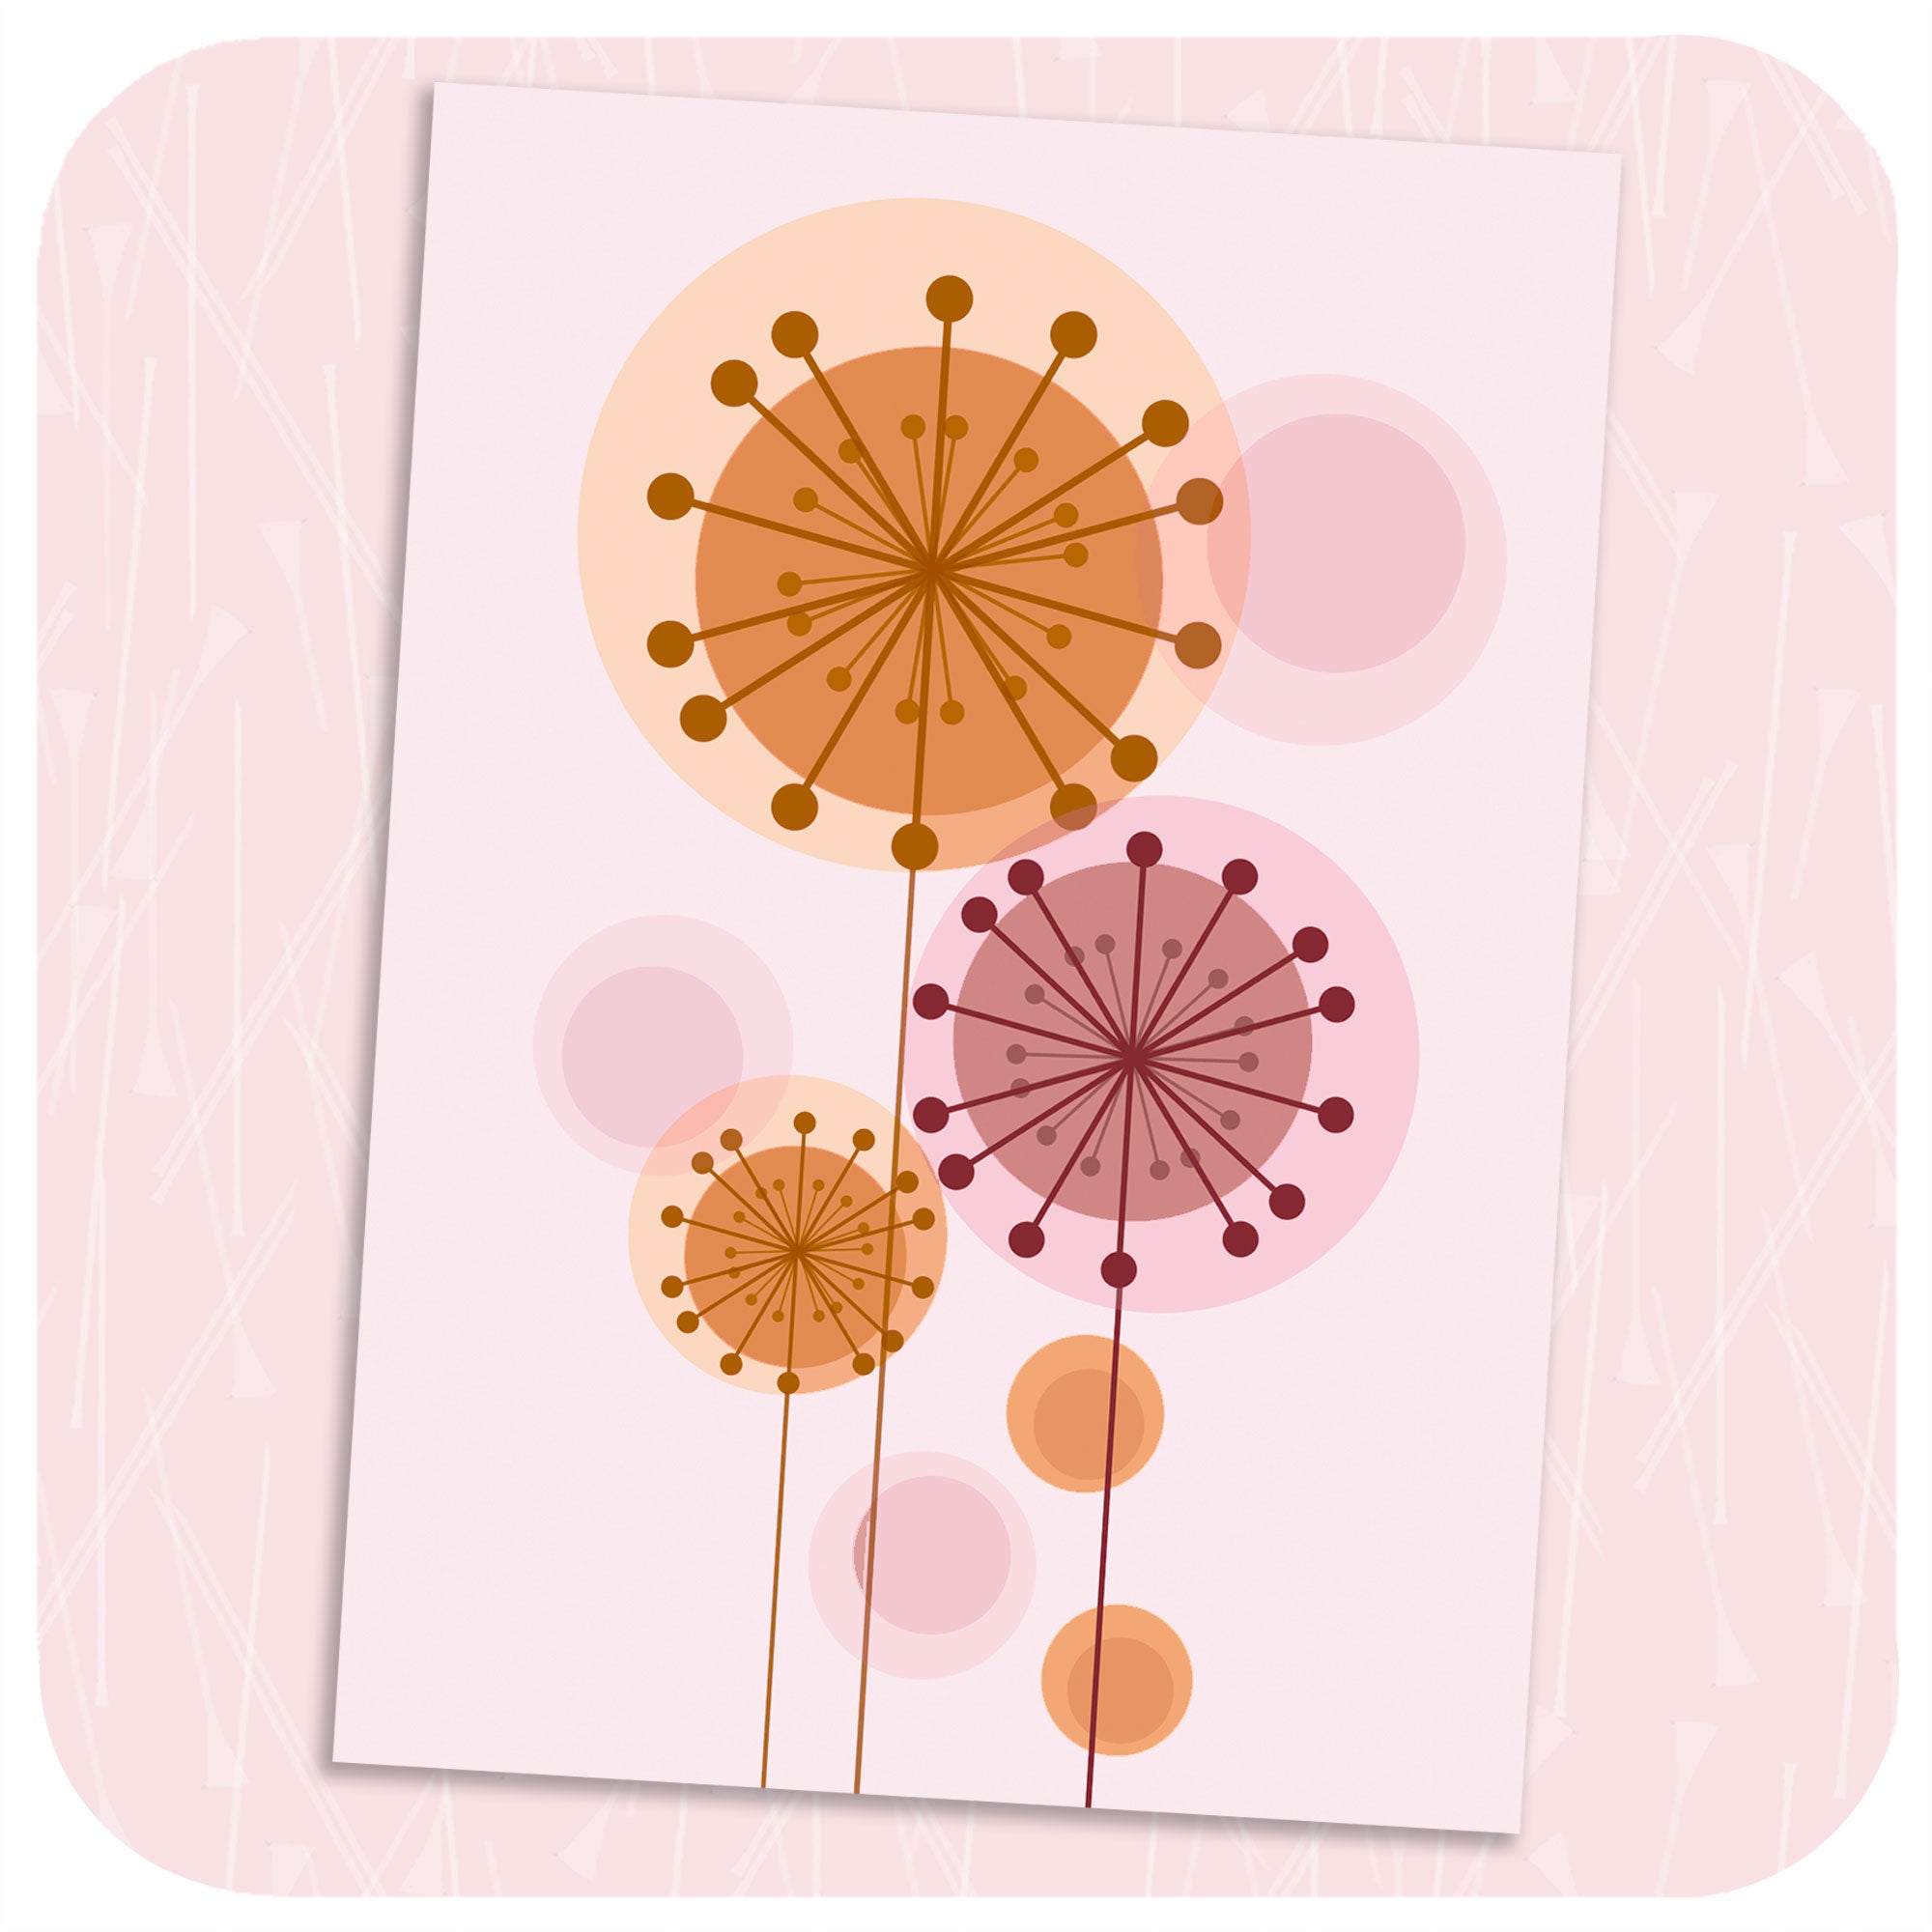 Retro Alliums Blank Greetings Card Graphic depiction | The Inkabilly Emporium